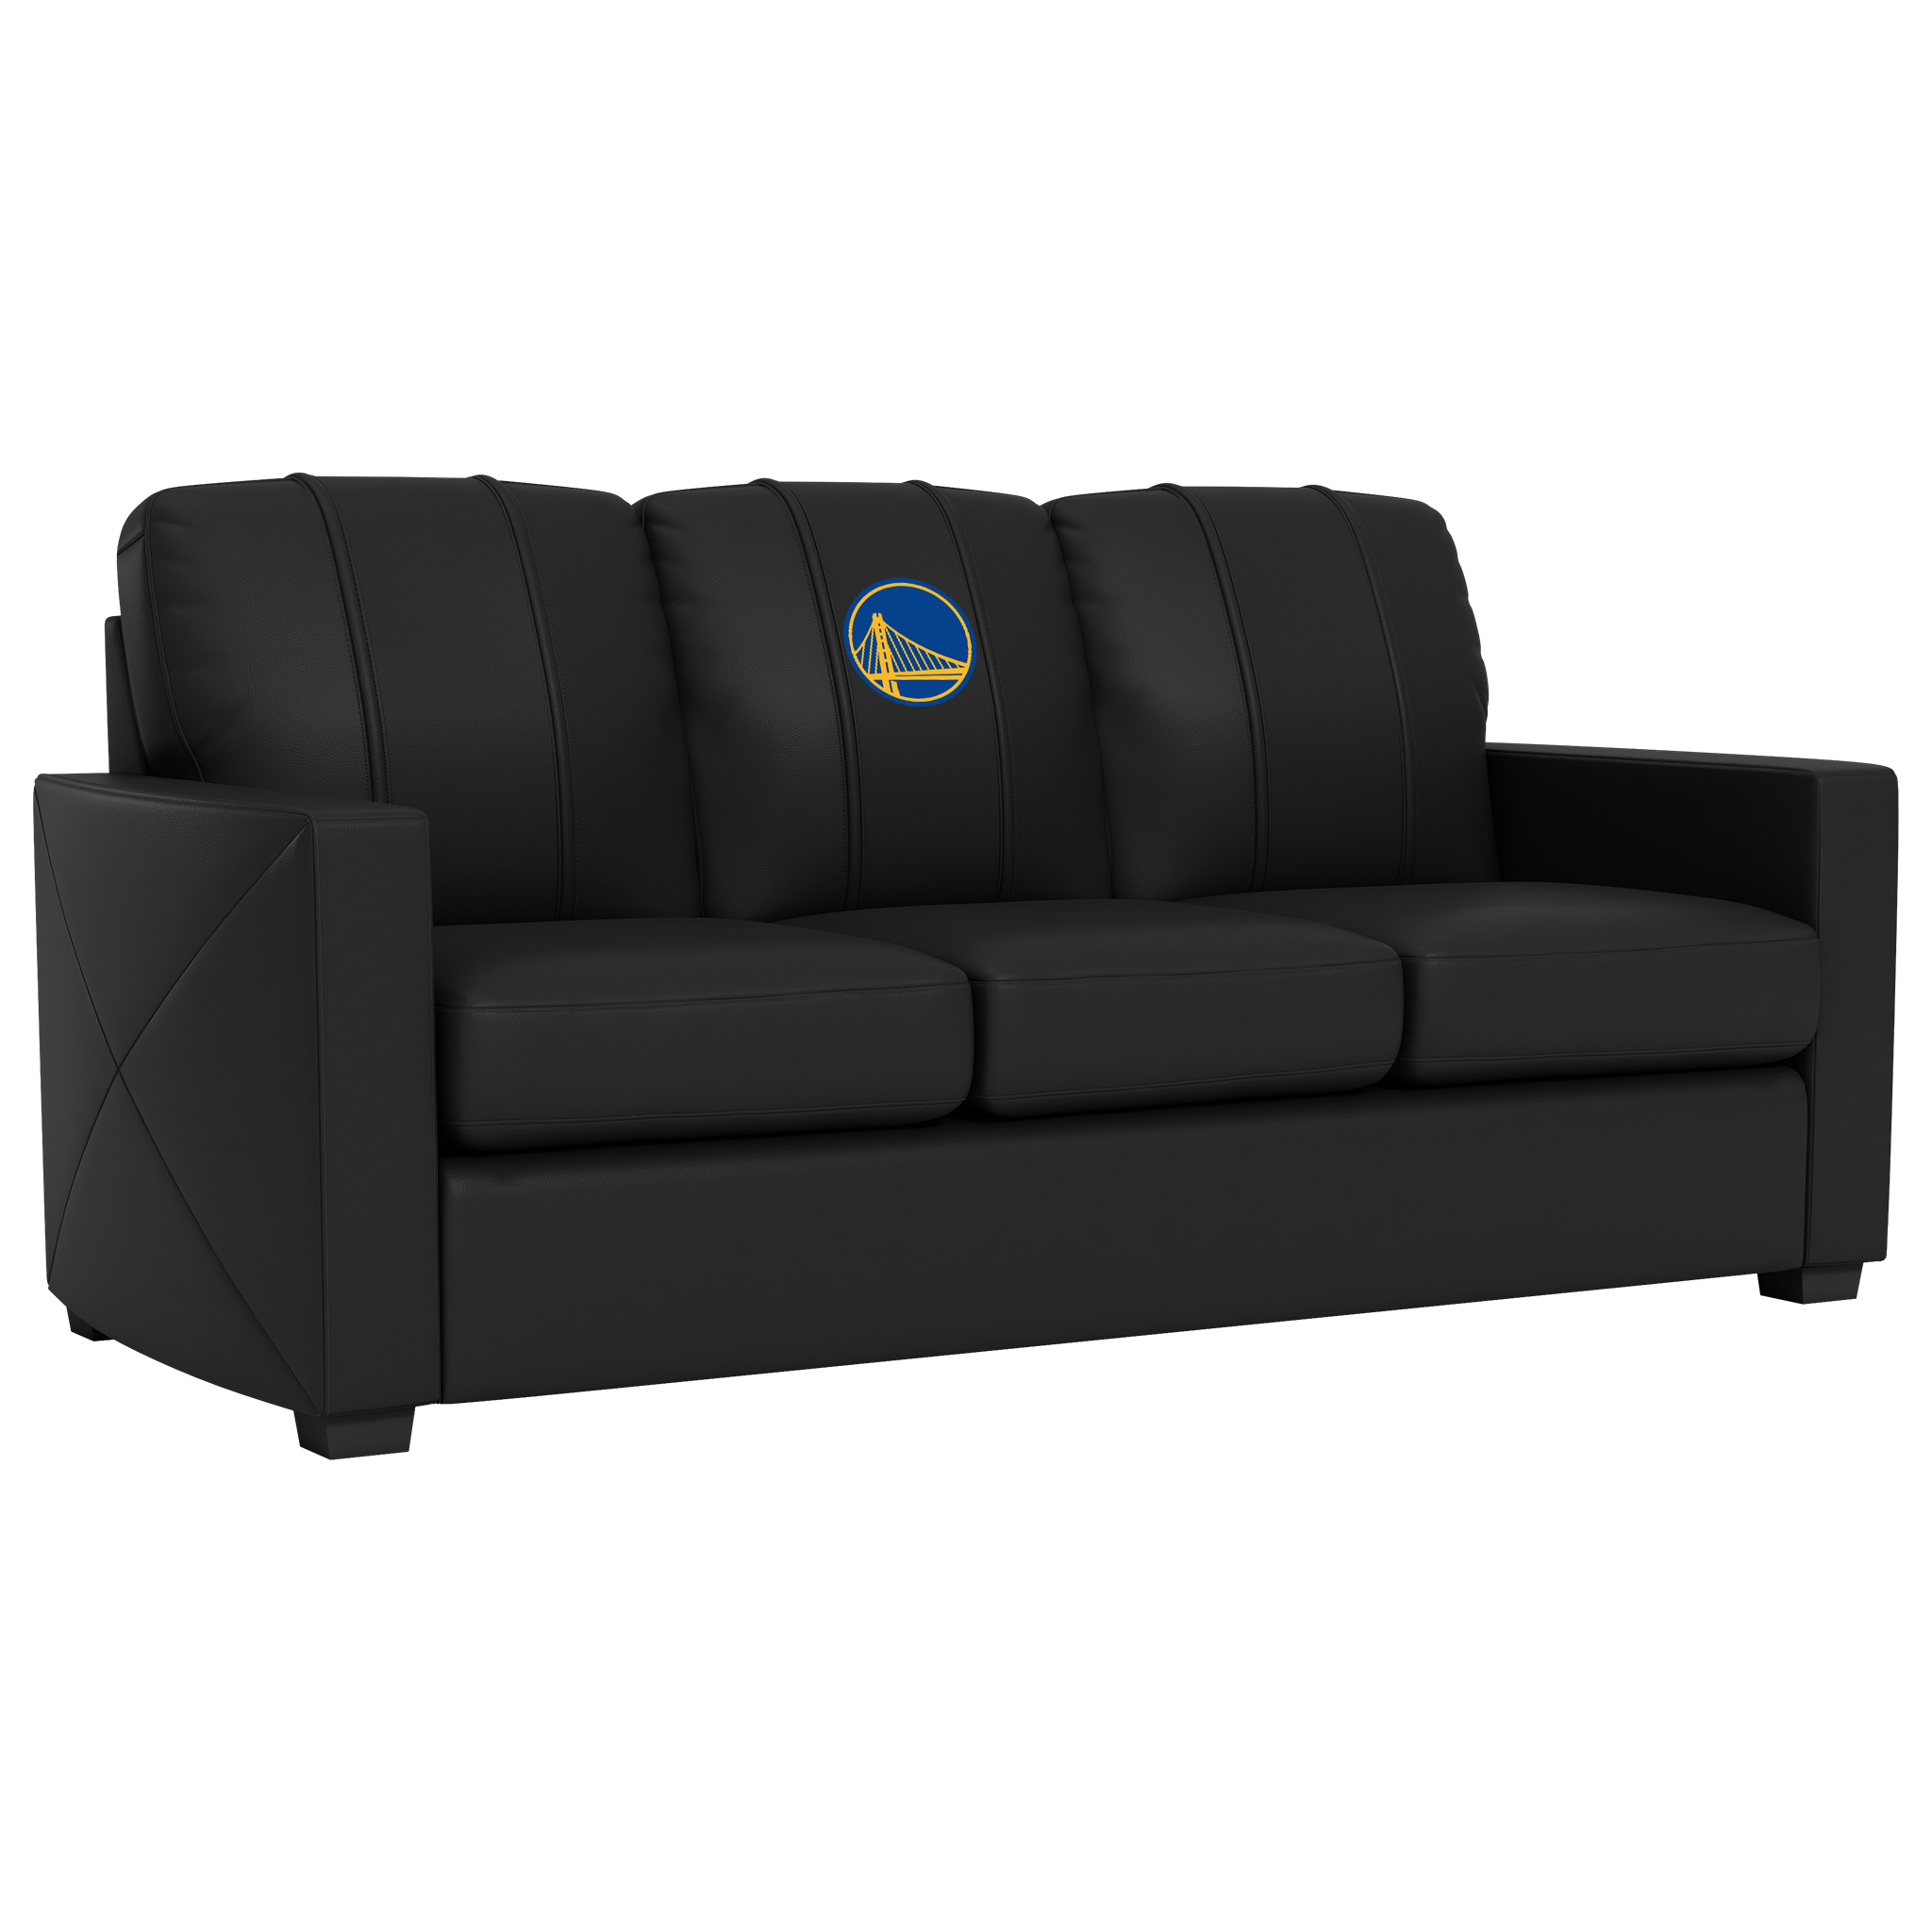 Golden State Warriors Silver Sofa with Golden State Warriors Logo